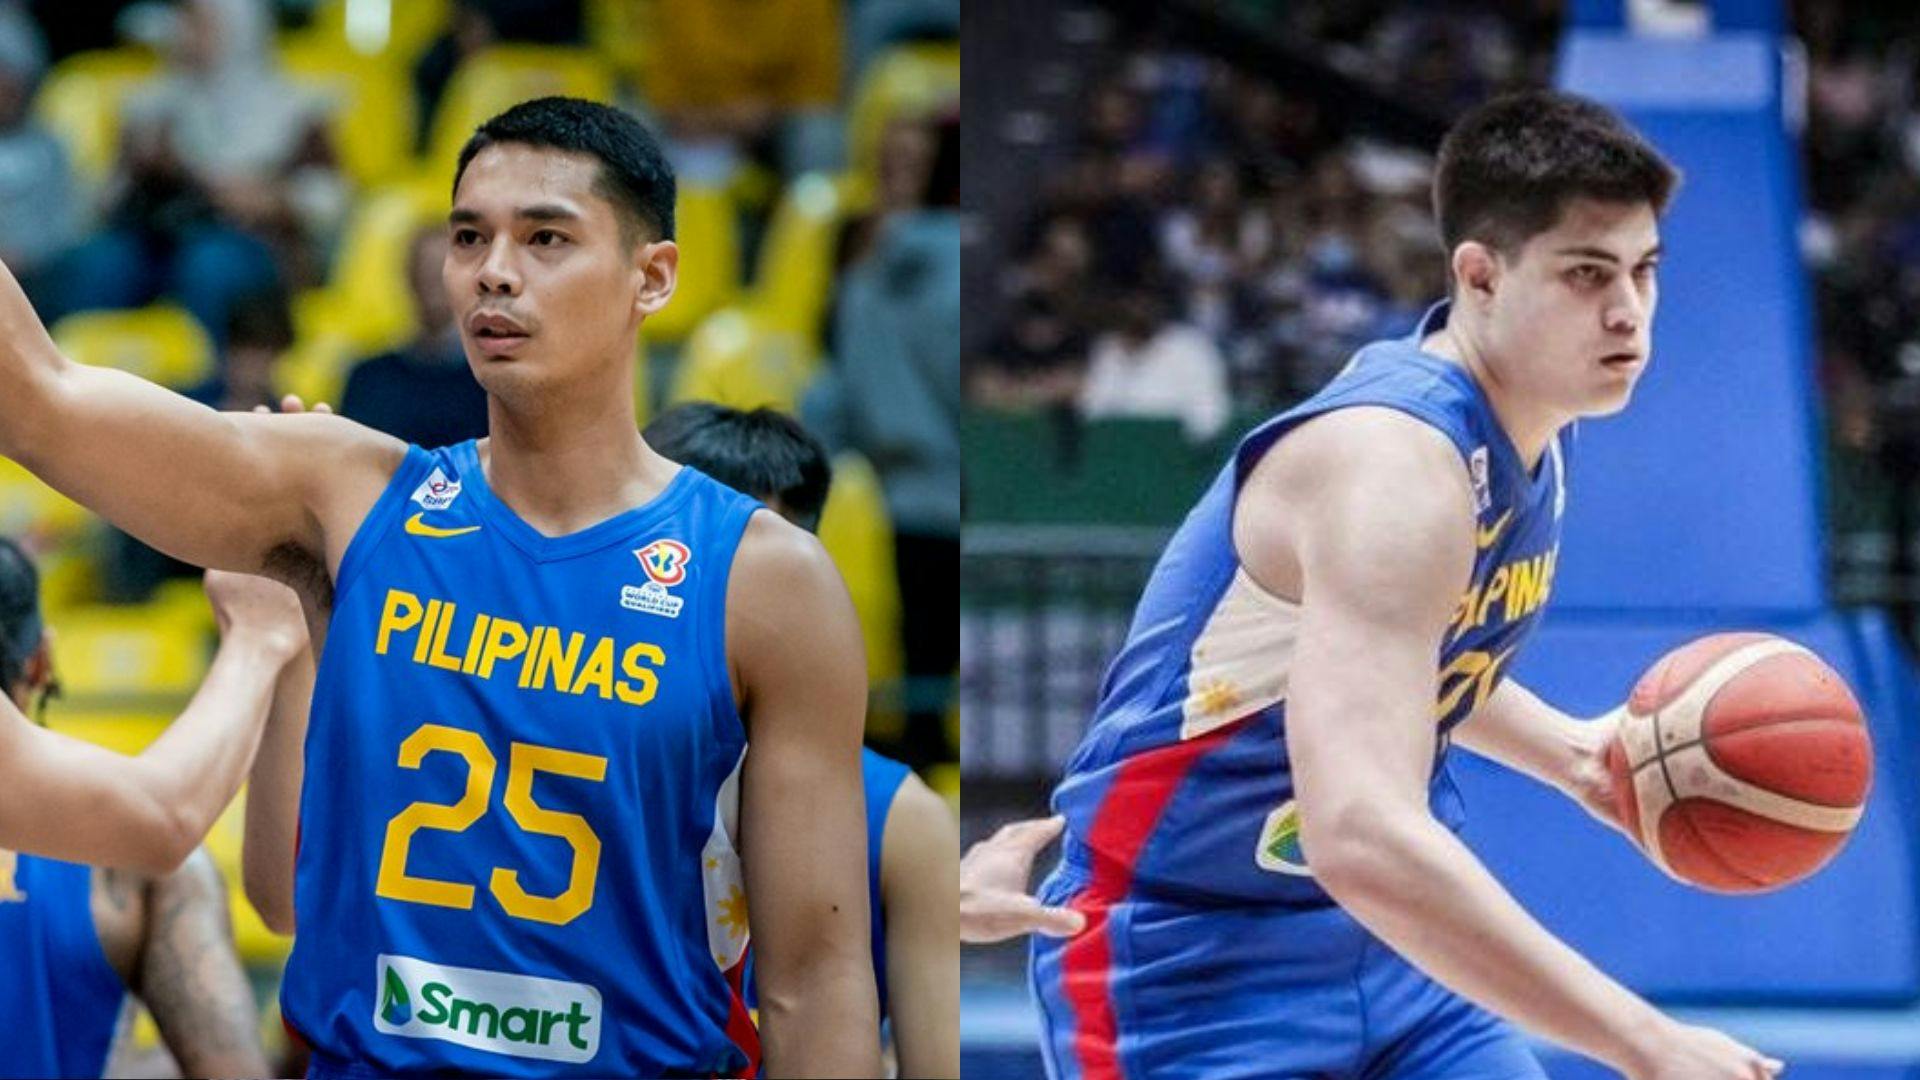 Japeth Aguilar, Mason Amos included in Gilas Pilipinas pool amid recent team injuries